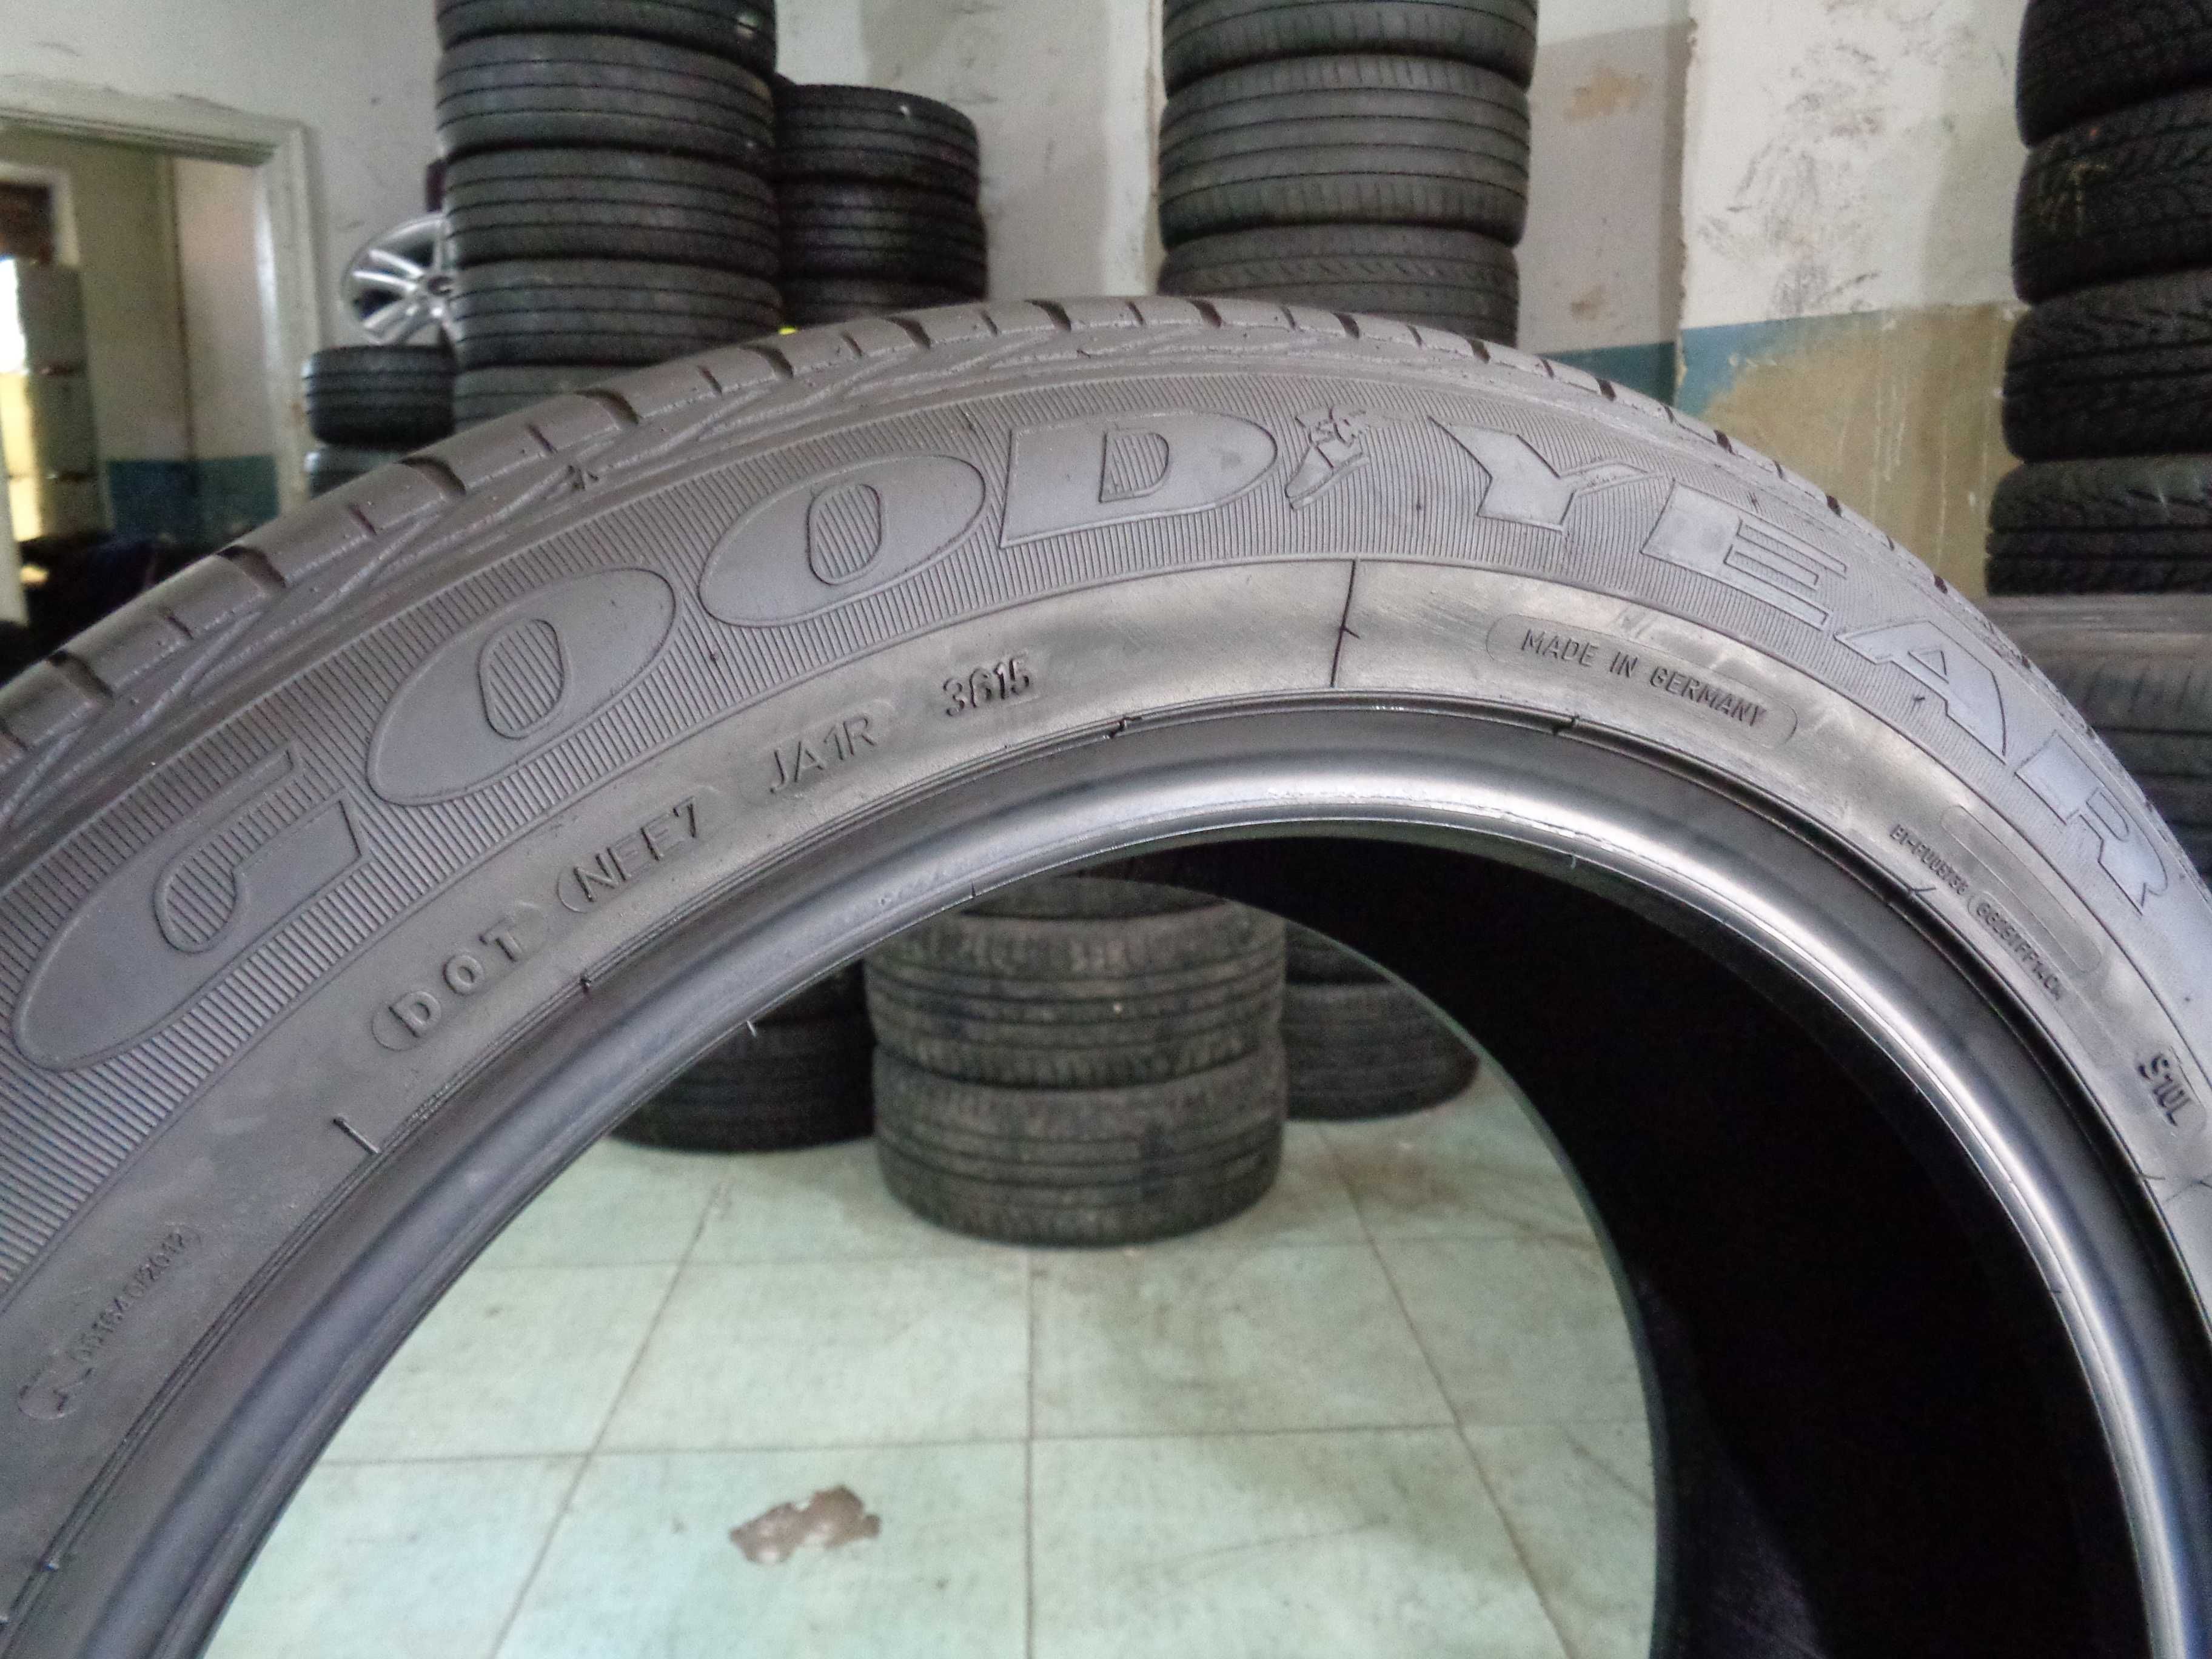 GoodYear Exellence 235/55r19 made in Germany 4шт, 15год, 5мм, ЛЕТО